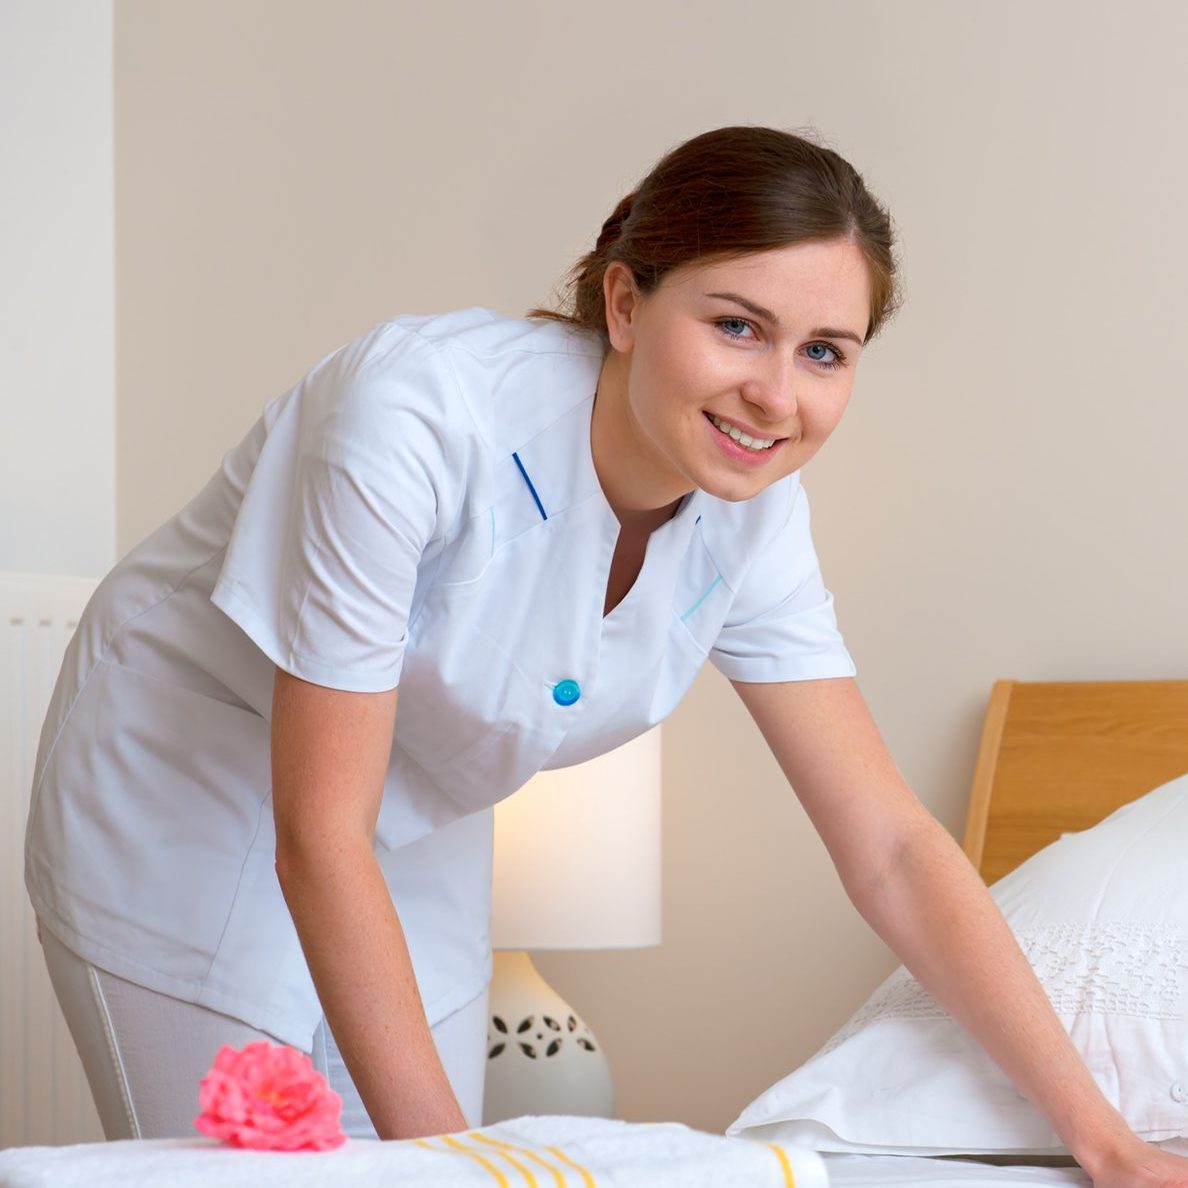 Cleaning Linen Services In London Staff